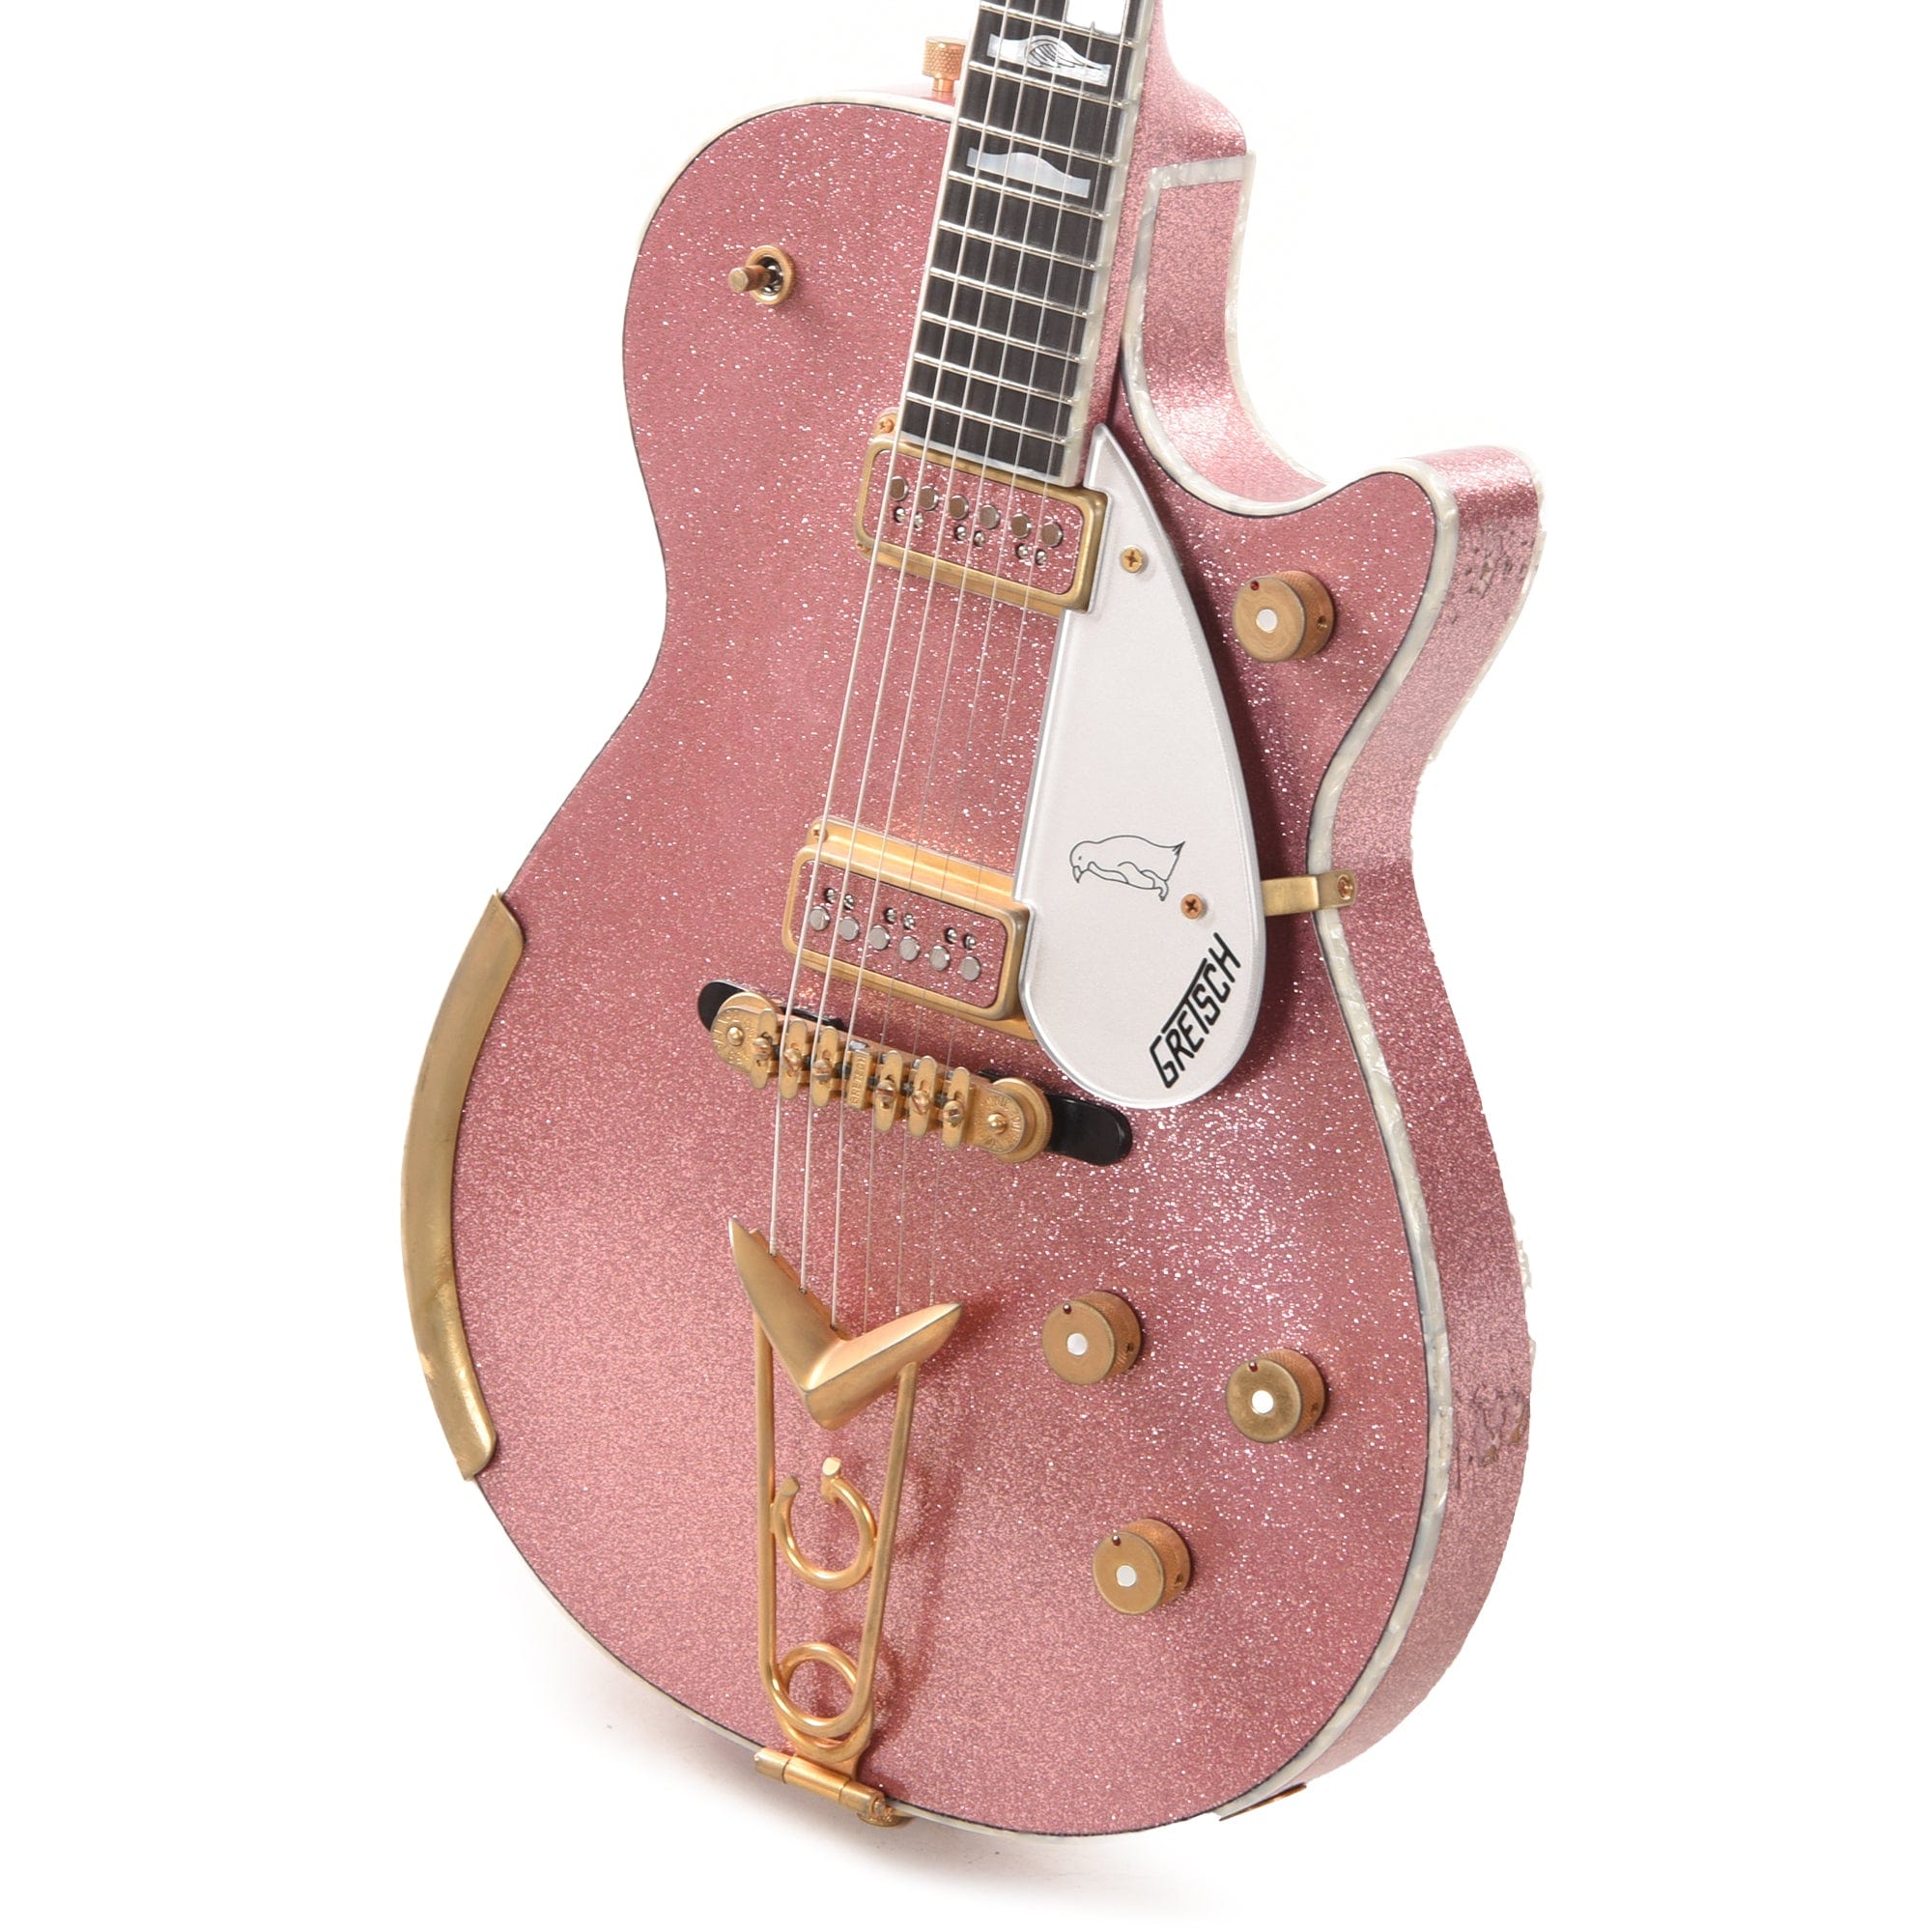 Gretsch Custom Shop G6134-57 1957 Michigan Mahogany Duo Jet Shell Pink Sparkle Relic w/Duncan Dyno Dynasonics Master Built by Stephen Stern Electric Guitars / Solid Body